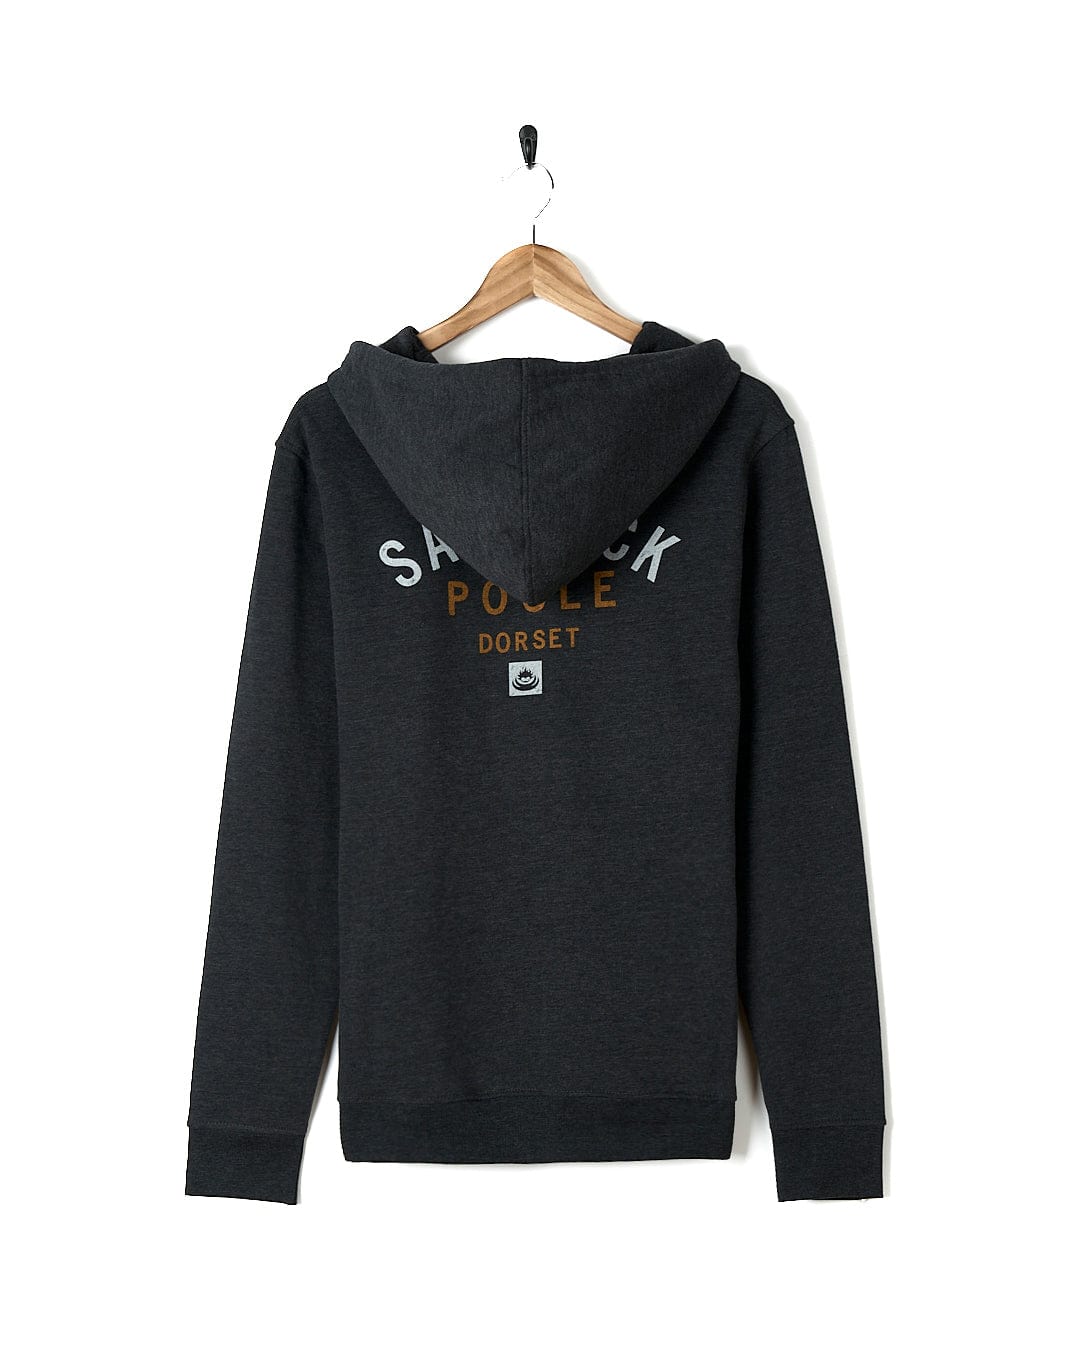 A Location Zip Hoodie - Poole - Dark Grey by Saltrock with the words 'shake police' on it.